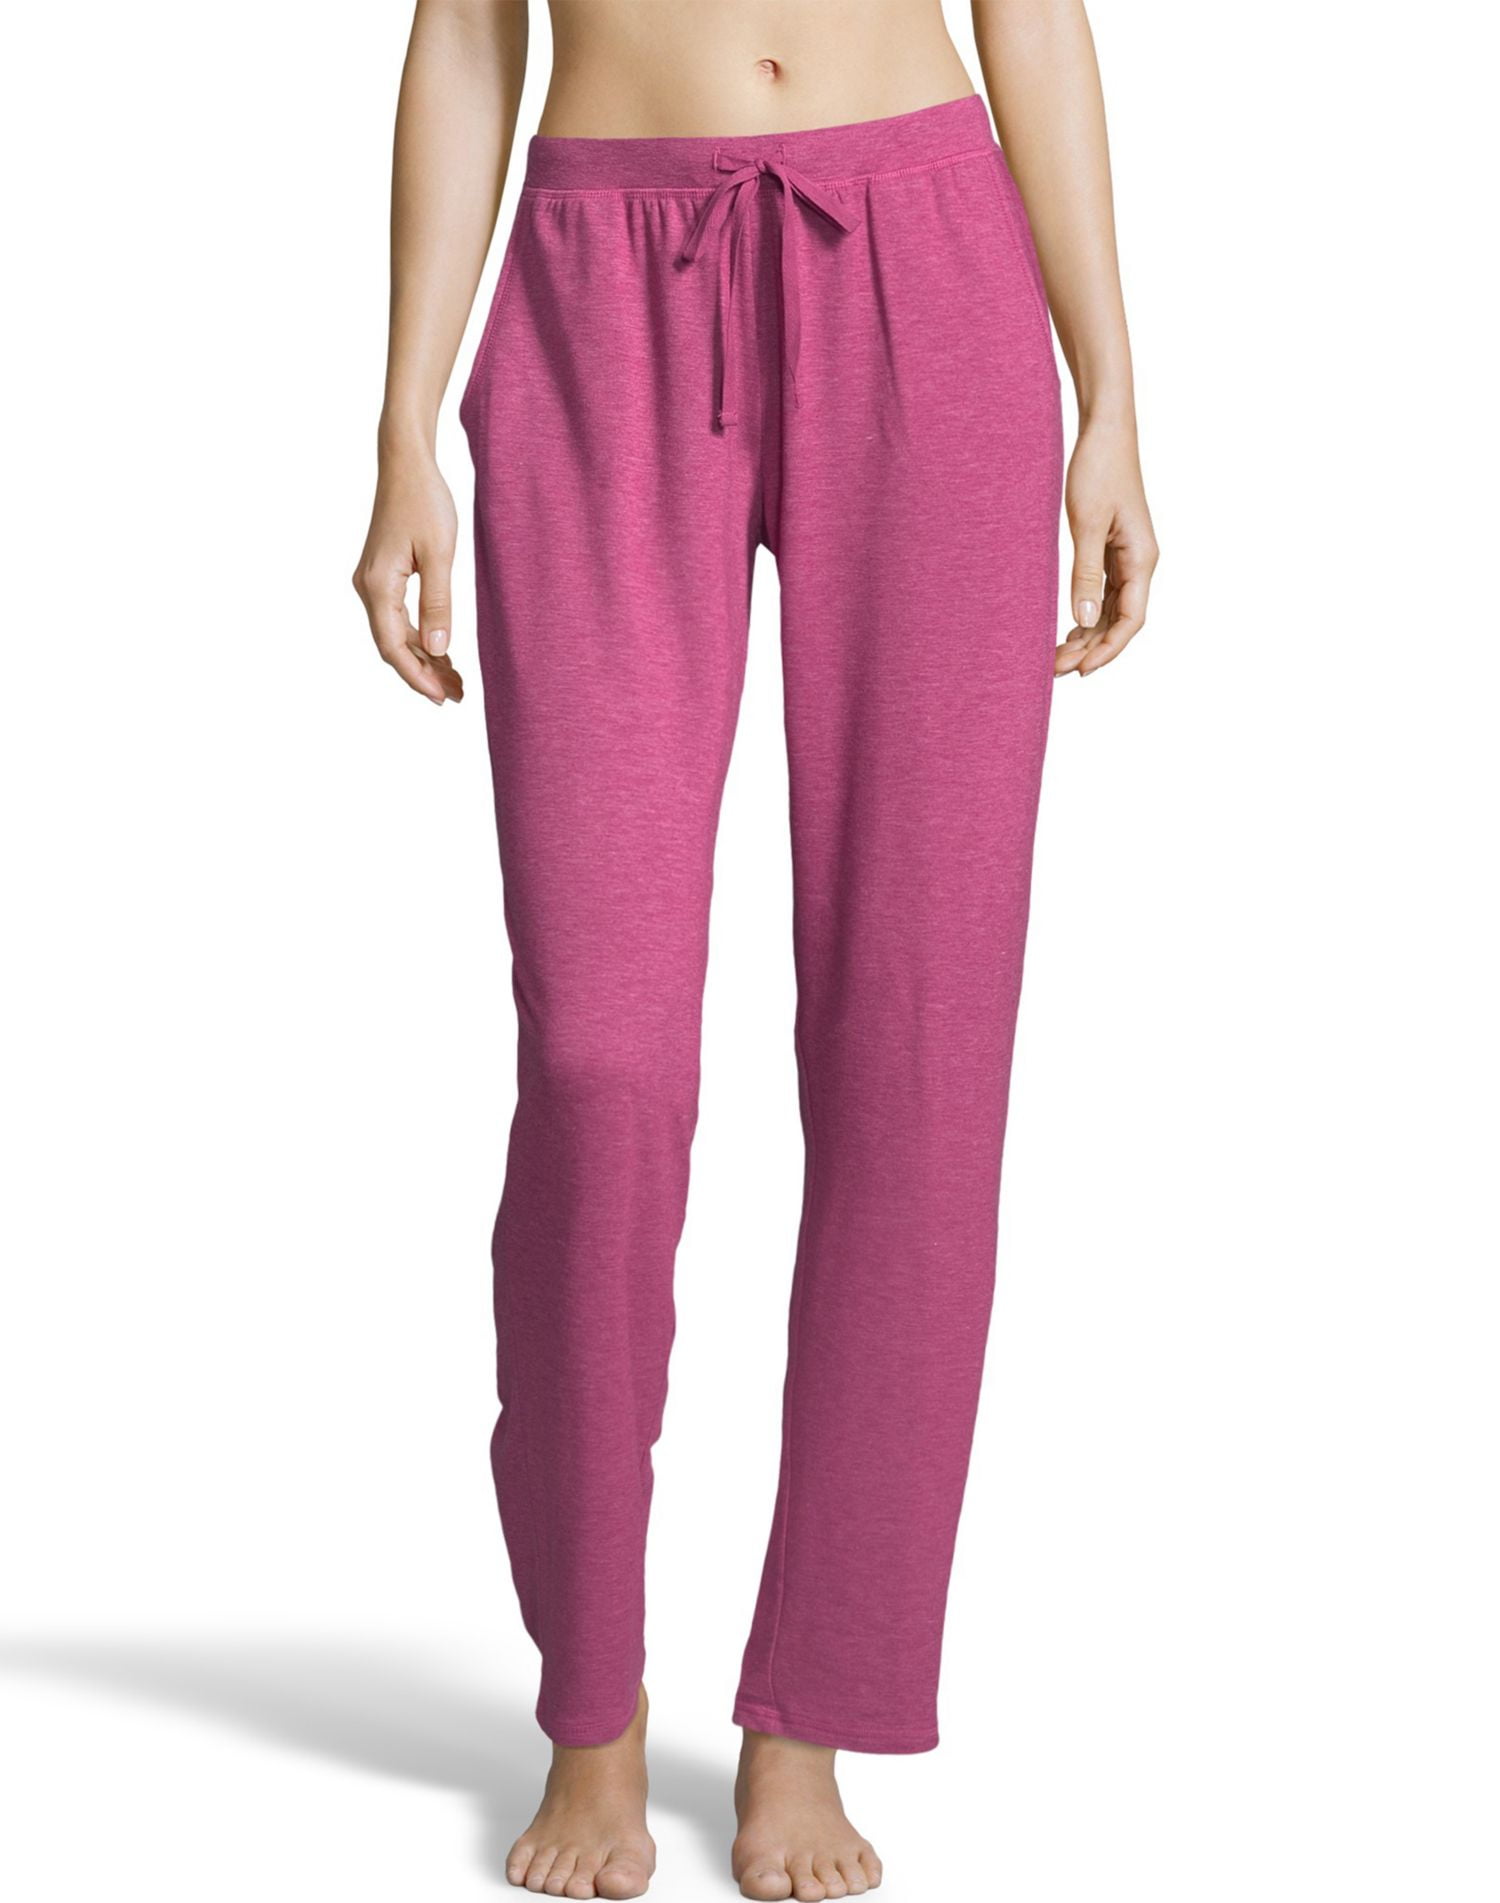 Hanes - Hanes Womens Heathered French Terry Lounge Pant, 2X, Raspberry ...